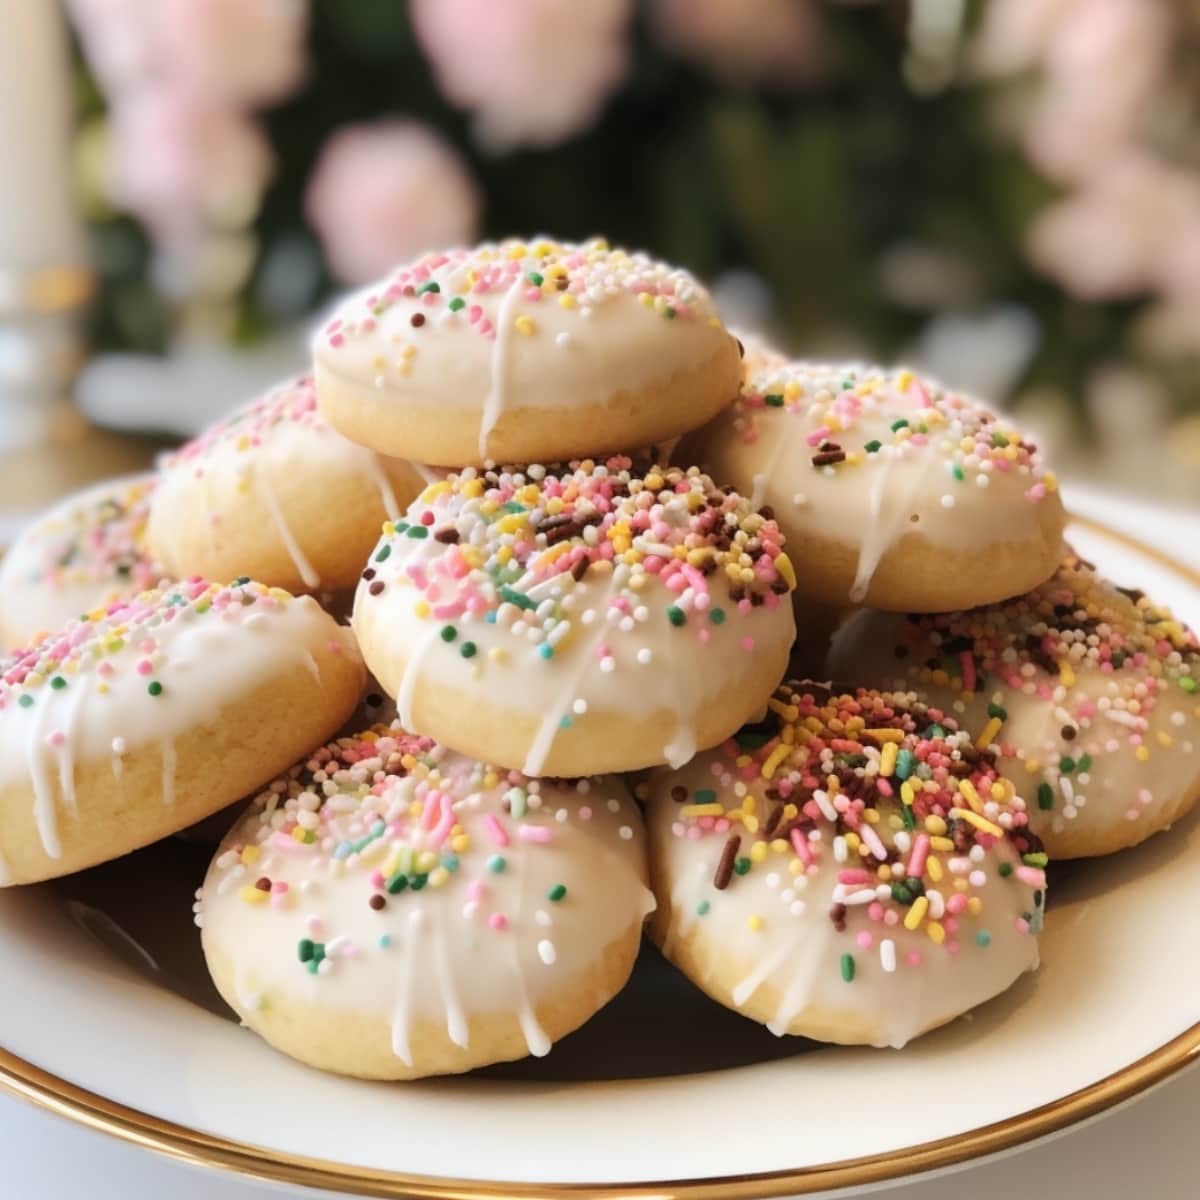 Bunch of Anginetti cookies with sugar glaze and sprinkles on plate.